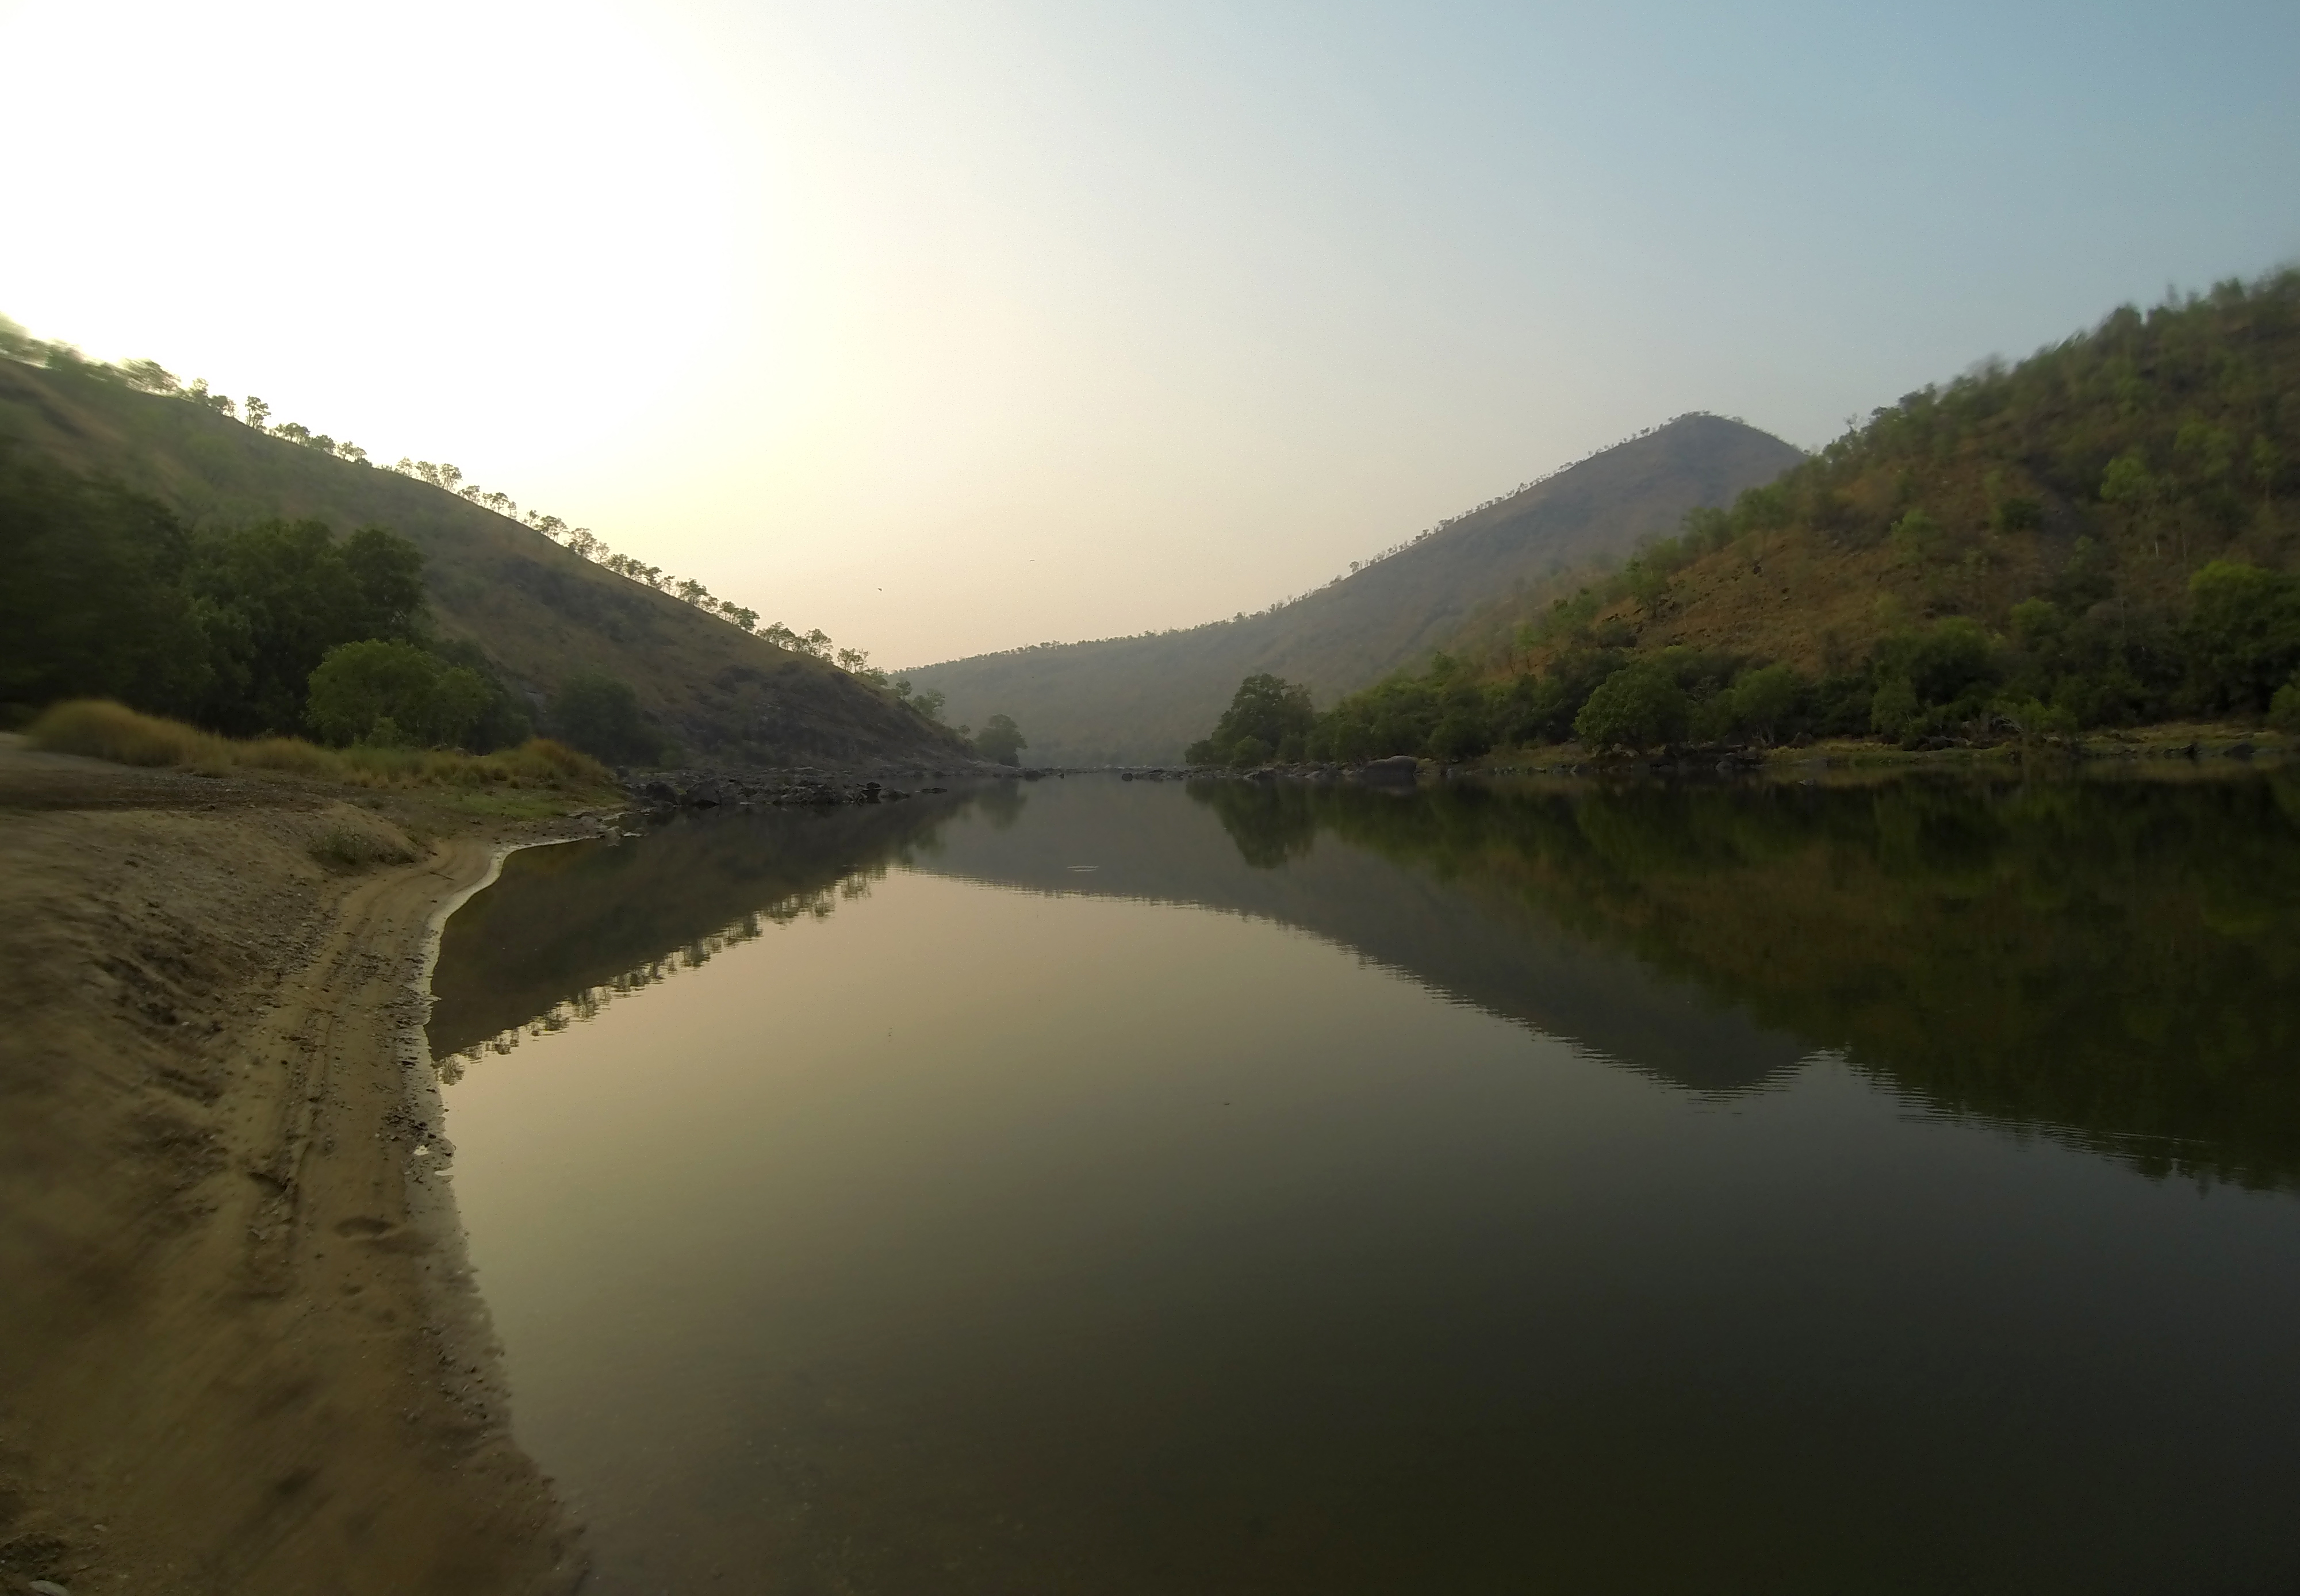 The river was alive in the sanctuary. The valleys echoed with the calls of fish eagles, and fish often leaped out of the water​. Credit: Nisarg Prakash